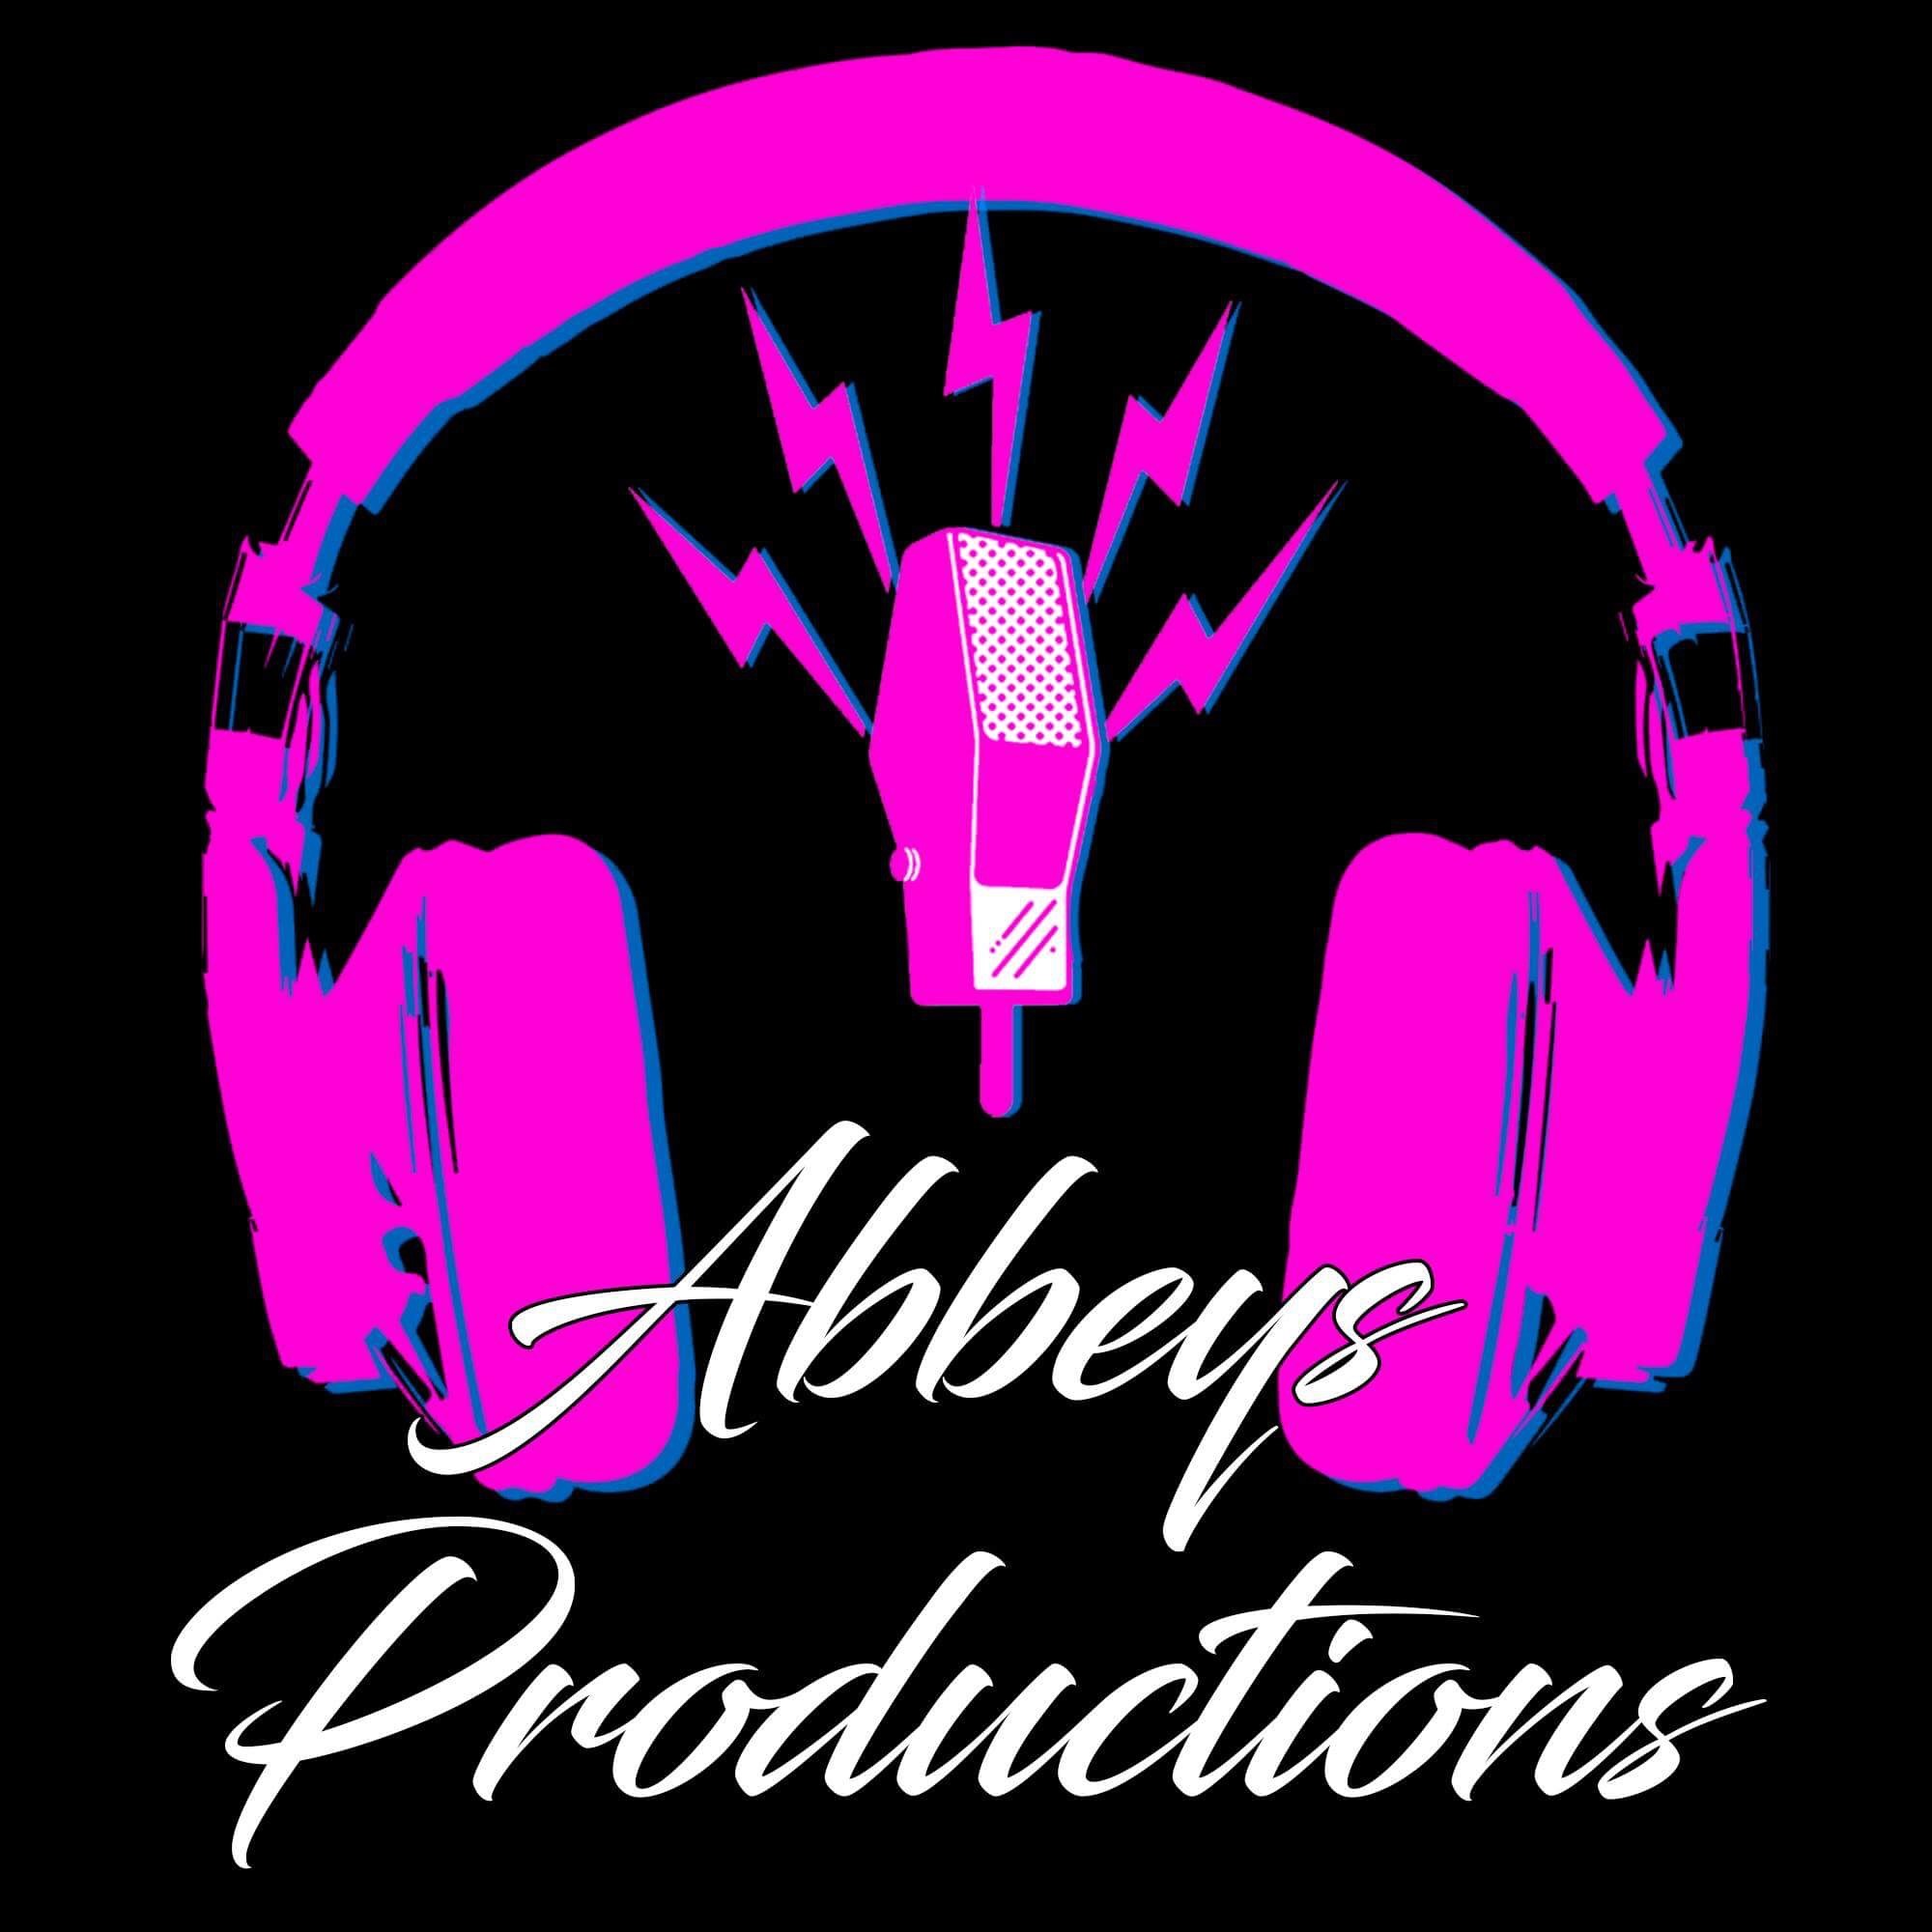 Abbeys Productions organizes and manages music events for artists from a multitude of genres. Their website can be reached at www.abbeysproductions.com.